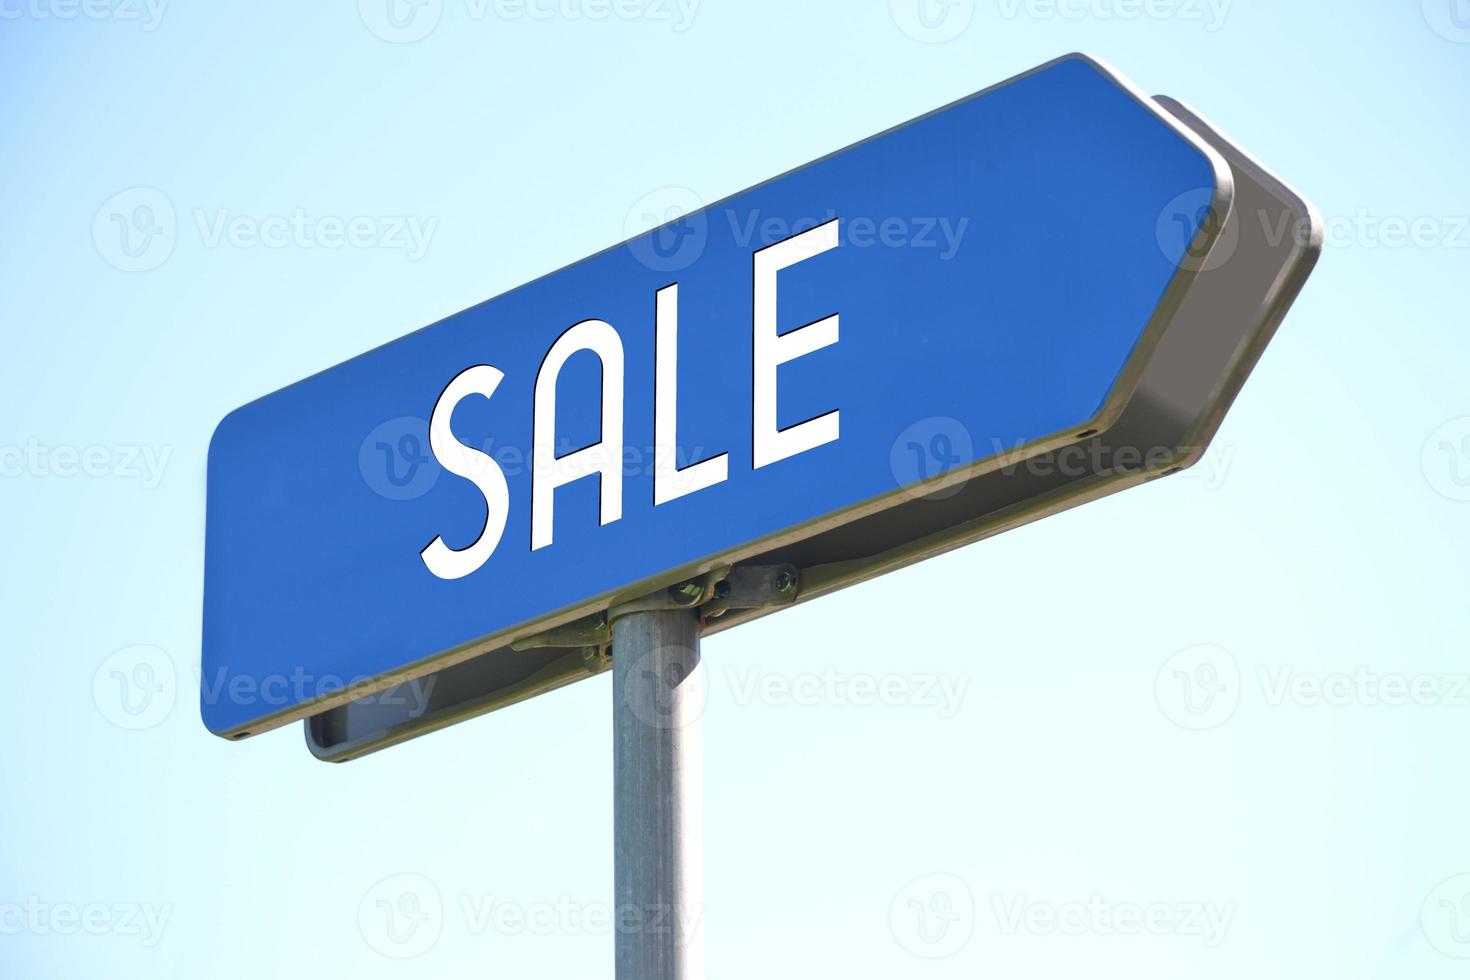 Sale - Blue Metal Signpost and Sky in Background photo